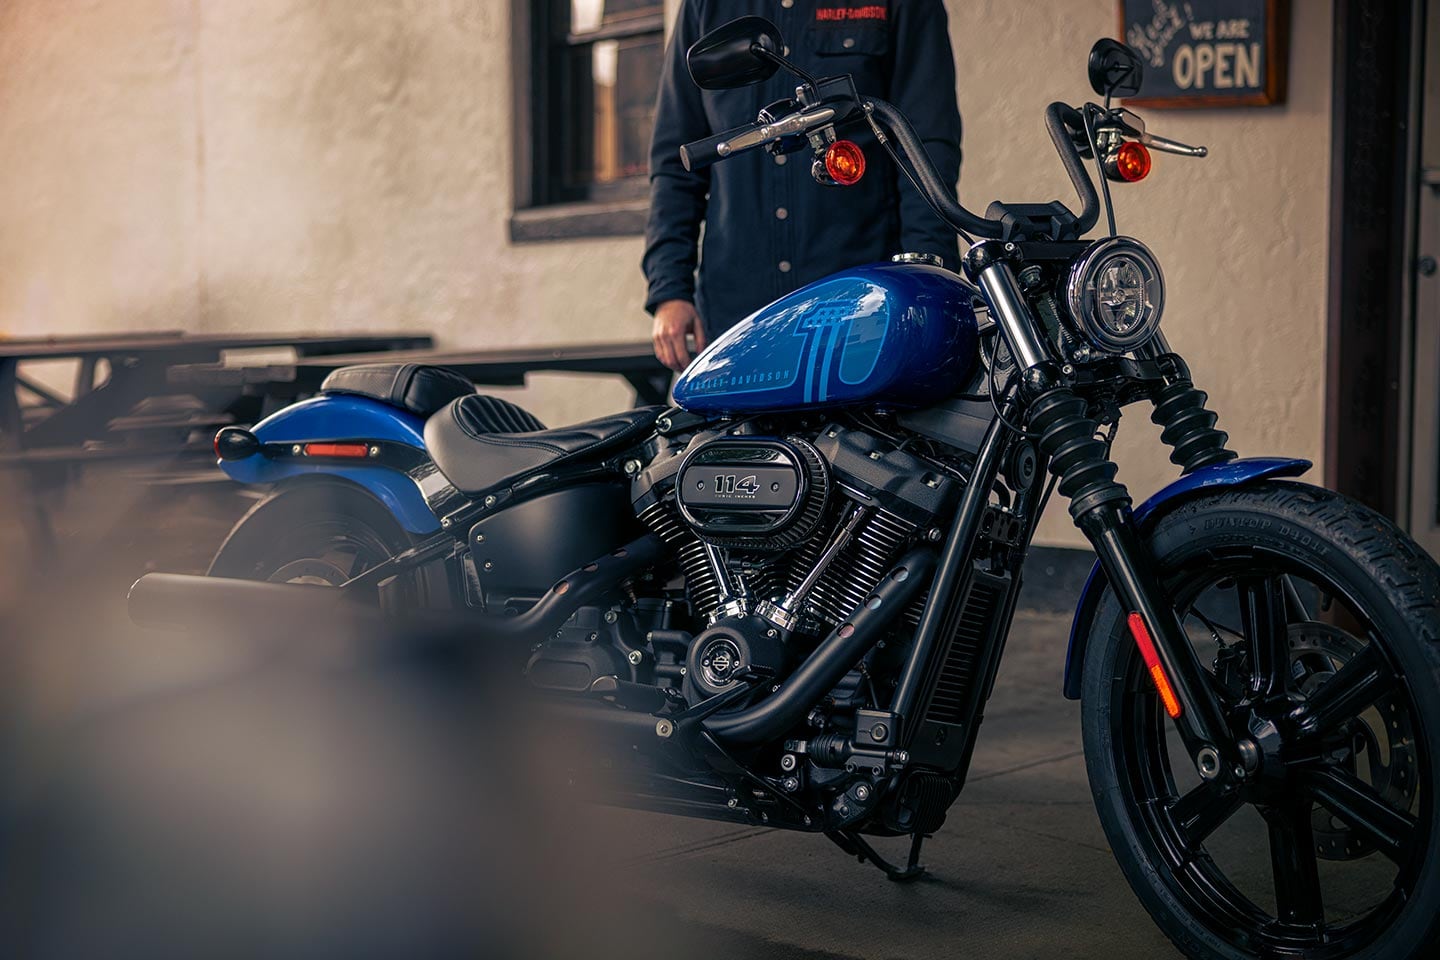 The blacked-out finishes lend a modern look to the classic bobber styling.